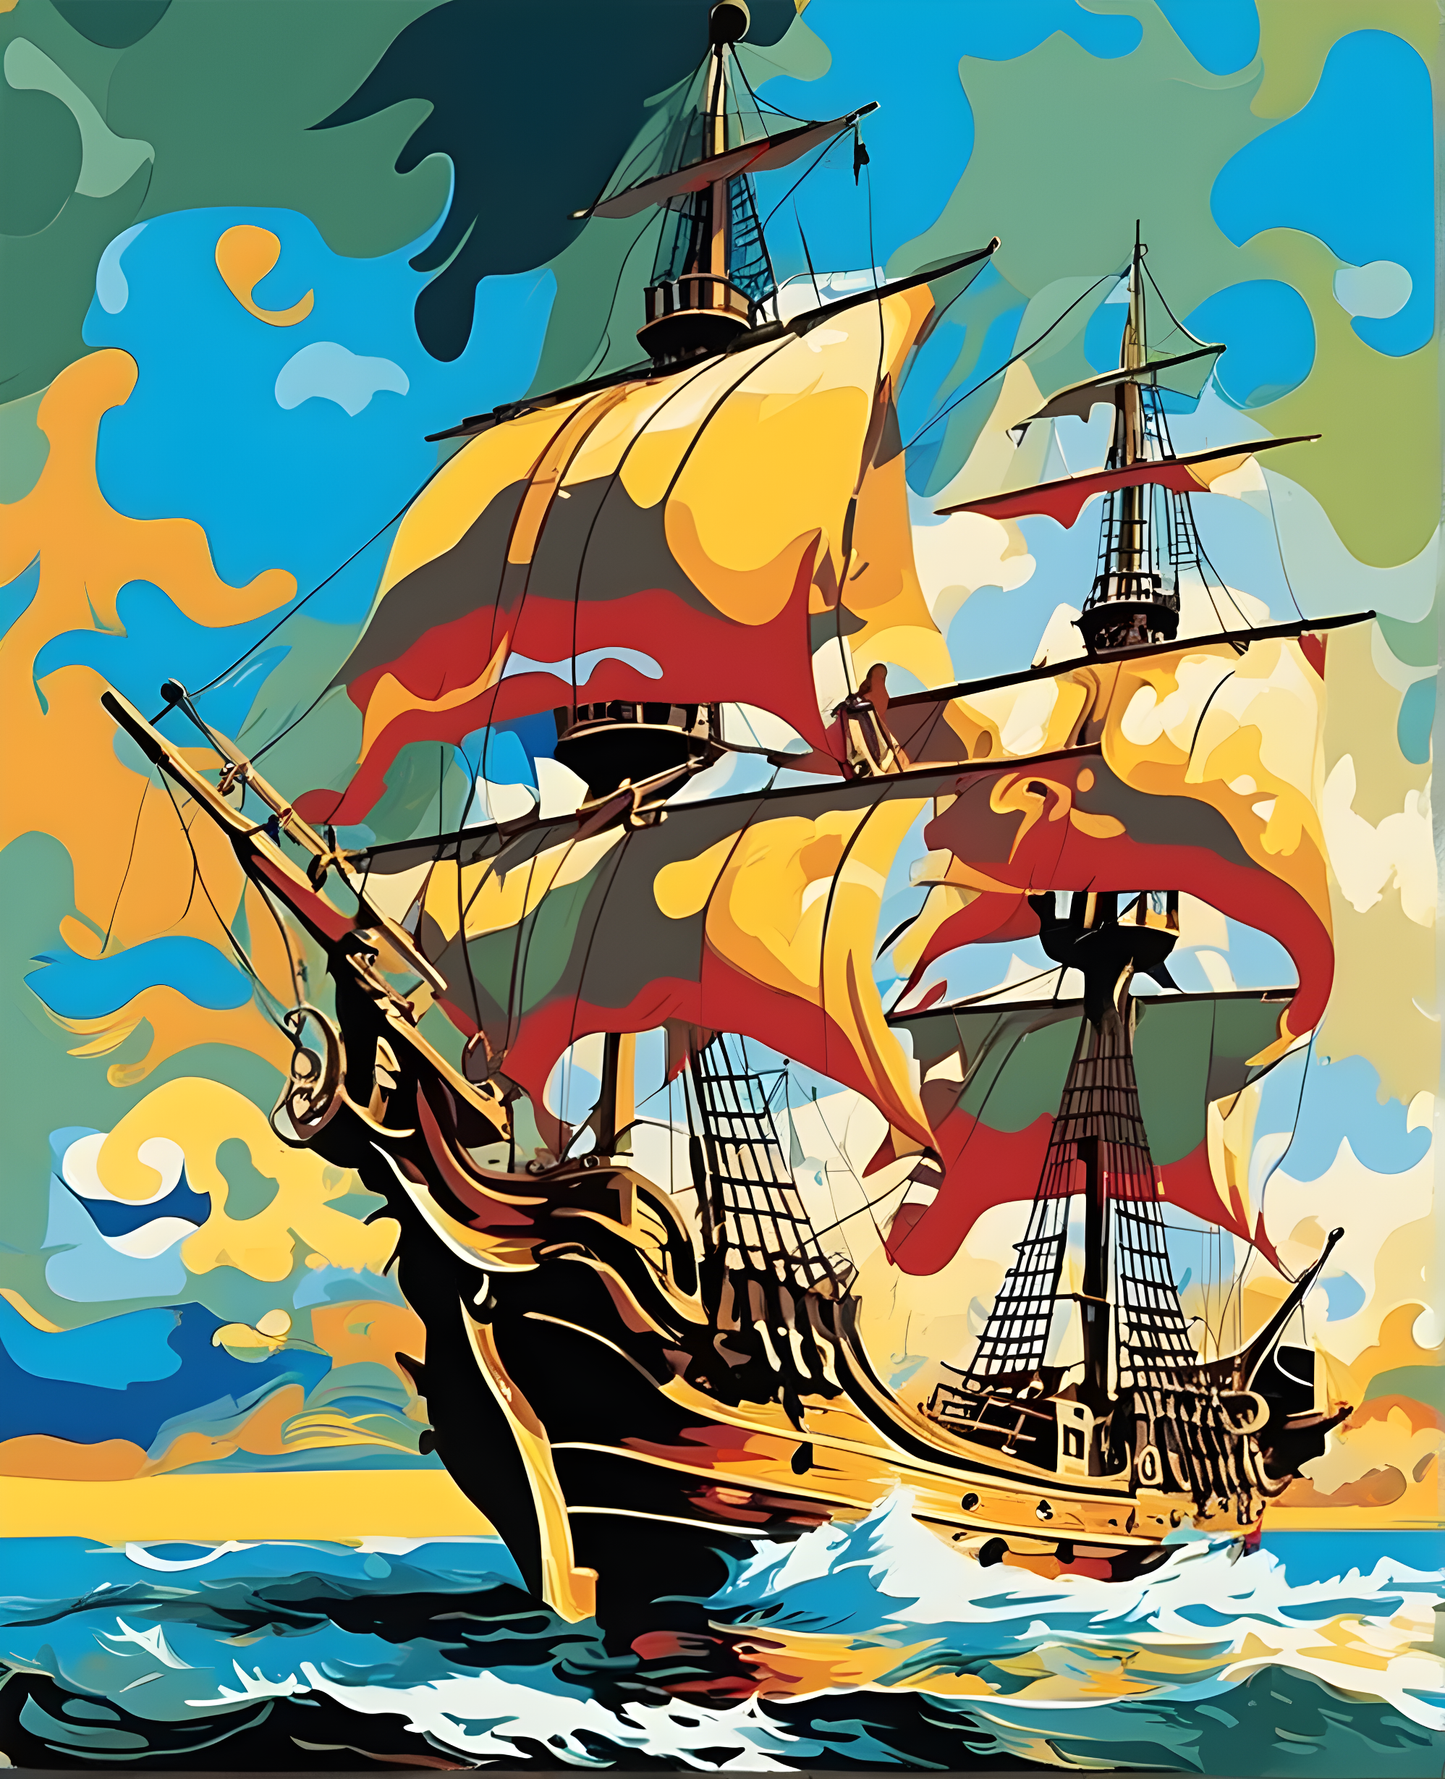 Pirate Ship (1) - Van-Go Paint-By-Number Kit